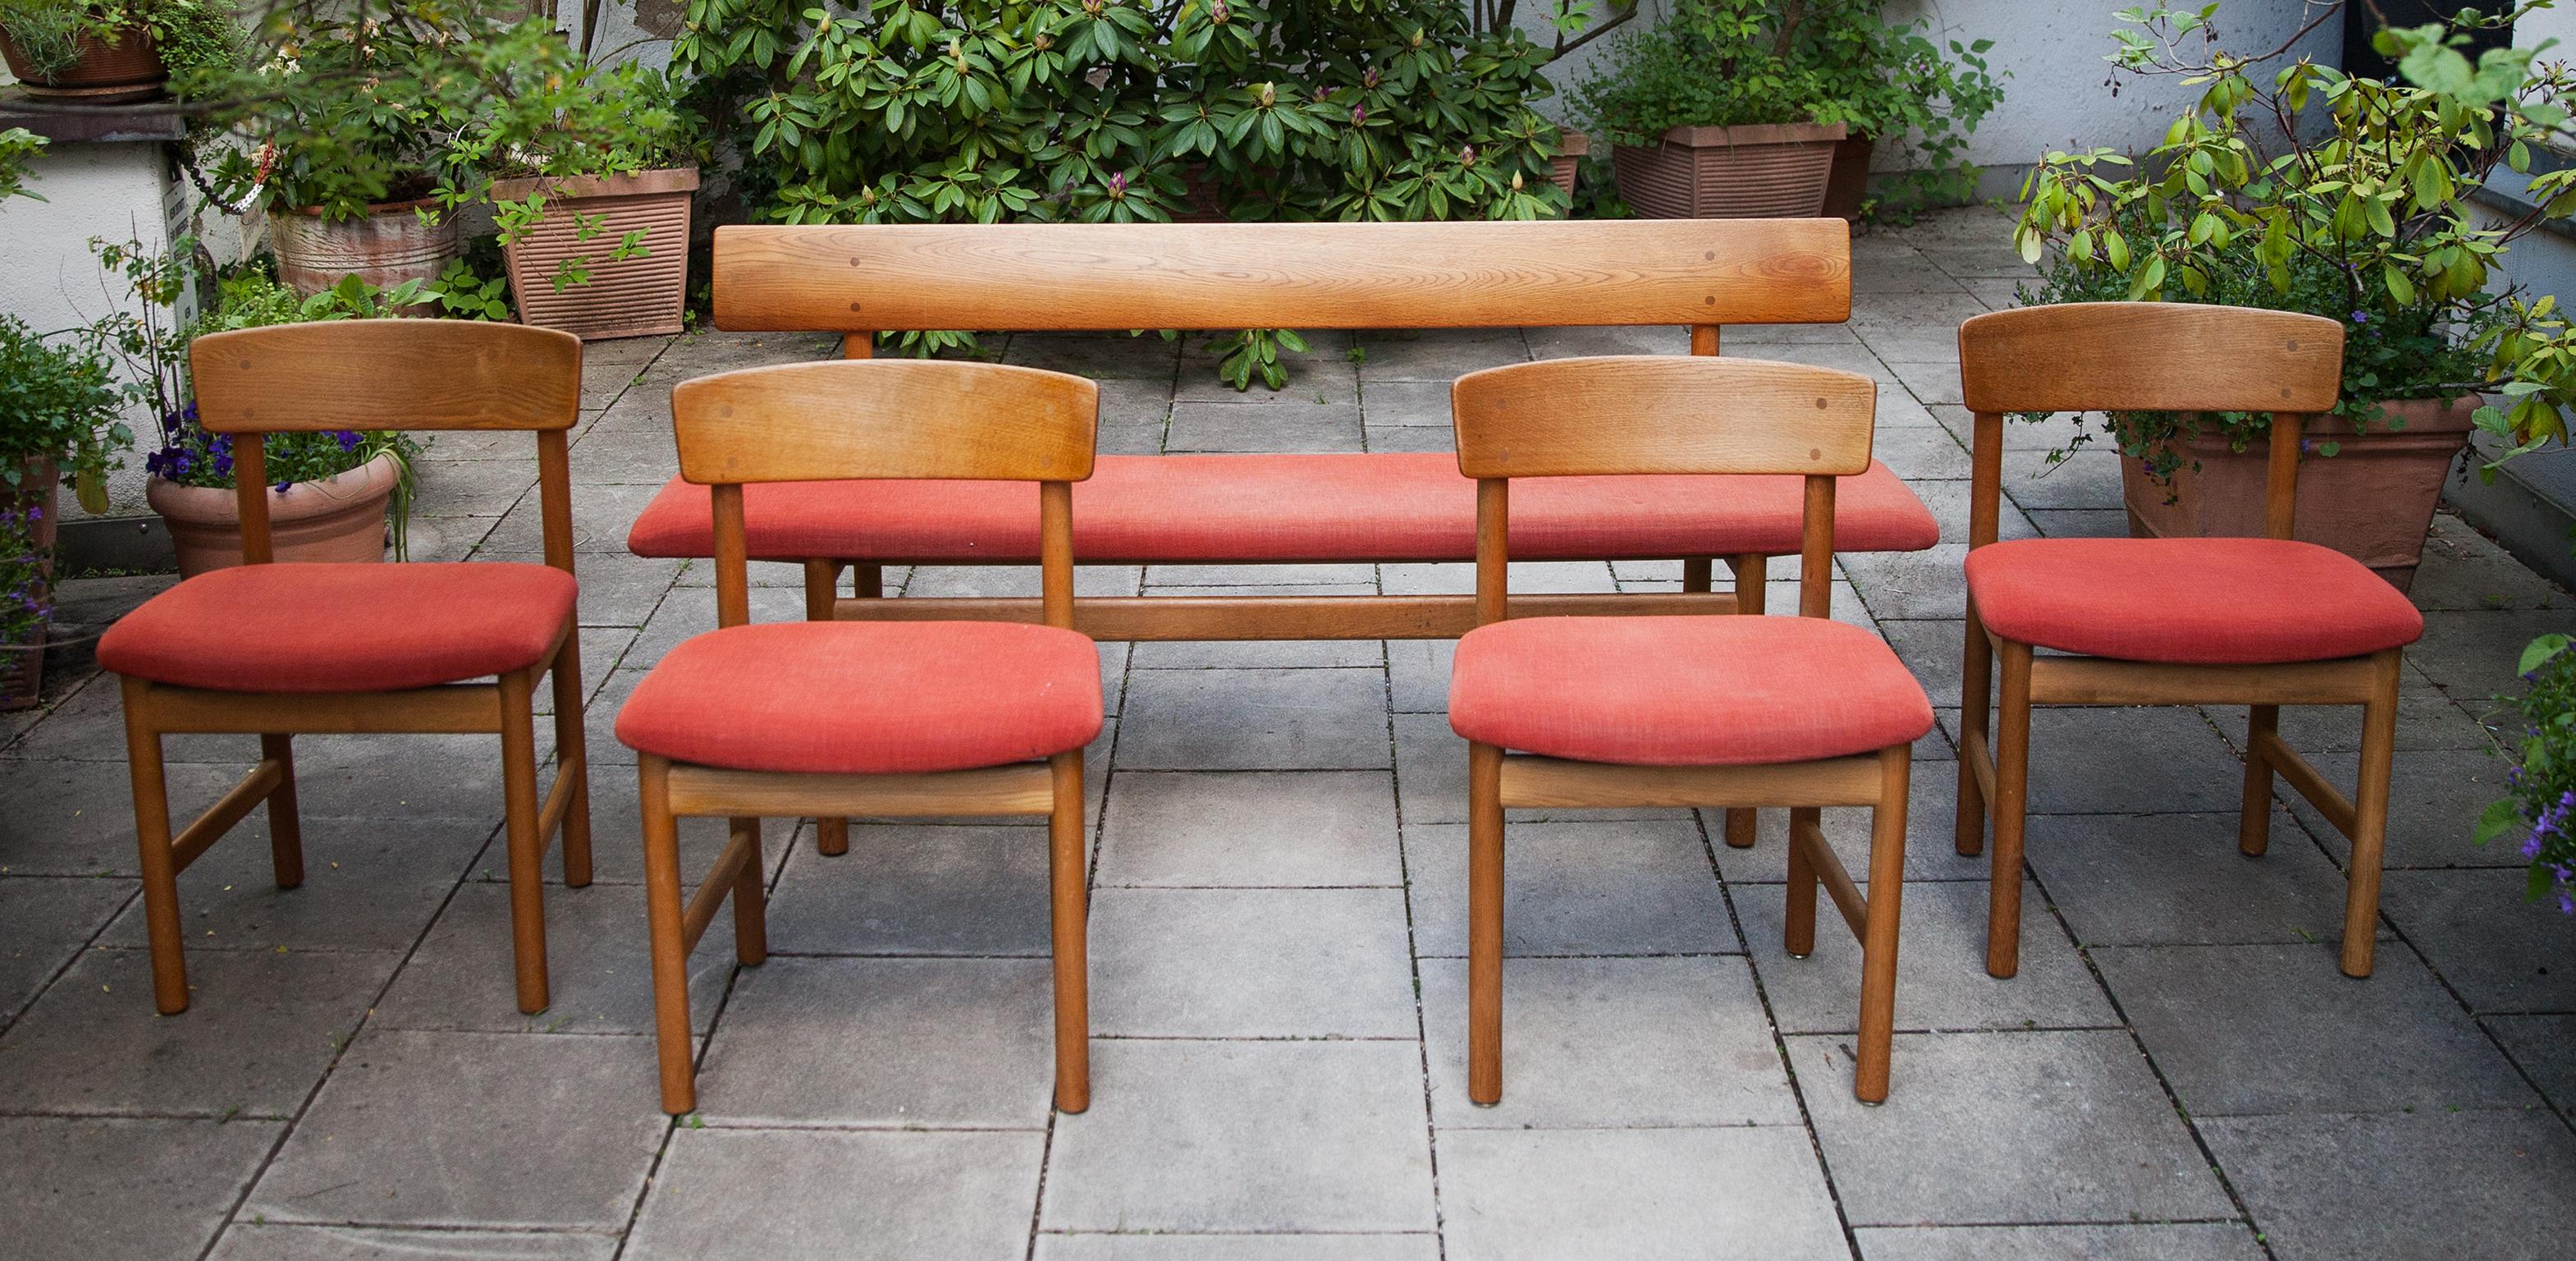 Borge Mogensen Oak dining chairs model 3236 Set of 4

Set of four Borge Mogensen oak wood dining chairs model 3236 made by Fredericia Stolefabrik, Fredericia in Denmark 1960s.

All covered with original red textile cover, and marked with the